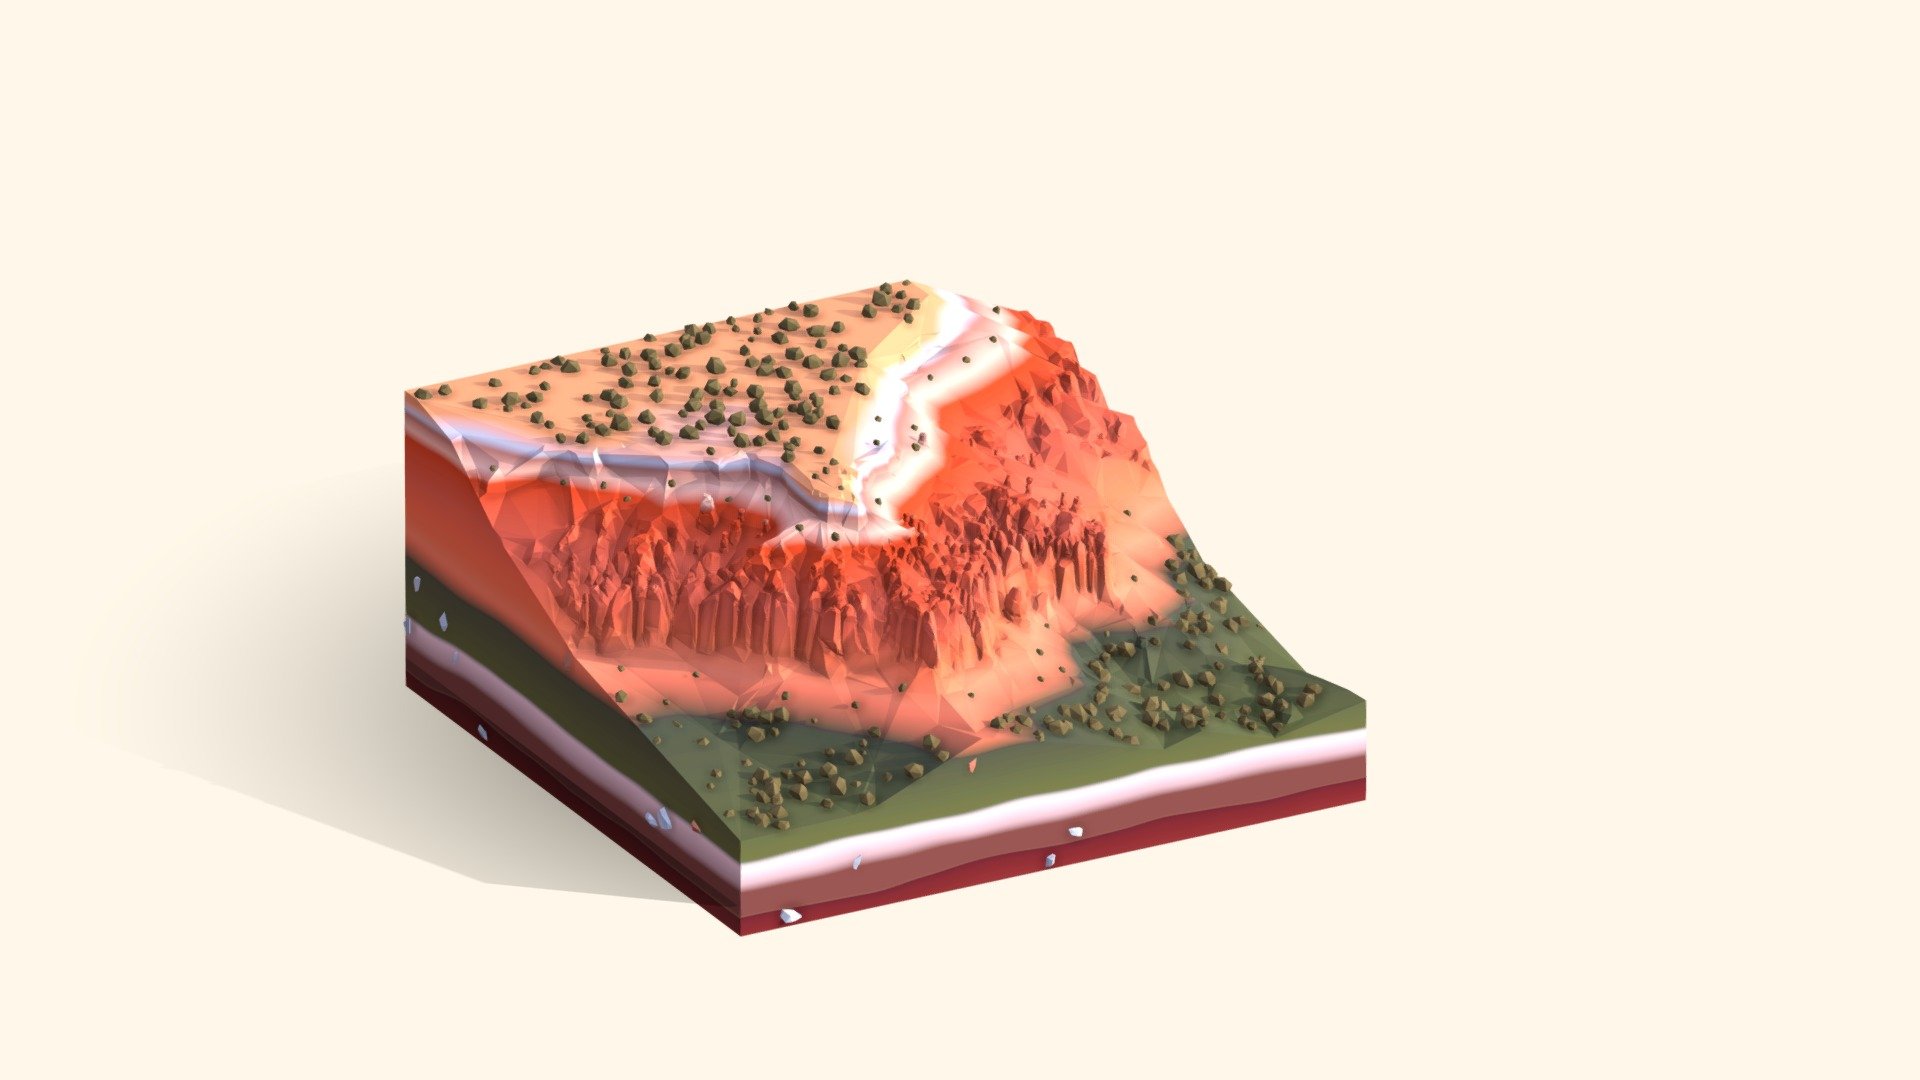 Cartoon Lowpoly Bryce Canyon Landmark 3d Illsutration

Created on Cinema 4d R17 (Render Ready on native file)

19939 Polygons

UVW textured

Game Ready, AR Ready, VR Ready

Include Monument, trees, landscape.
 - Cartoon Low Poly Bryce Canyon Landmark - Buy Royalty Free 3D model by antonmoek 3d model